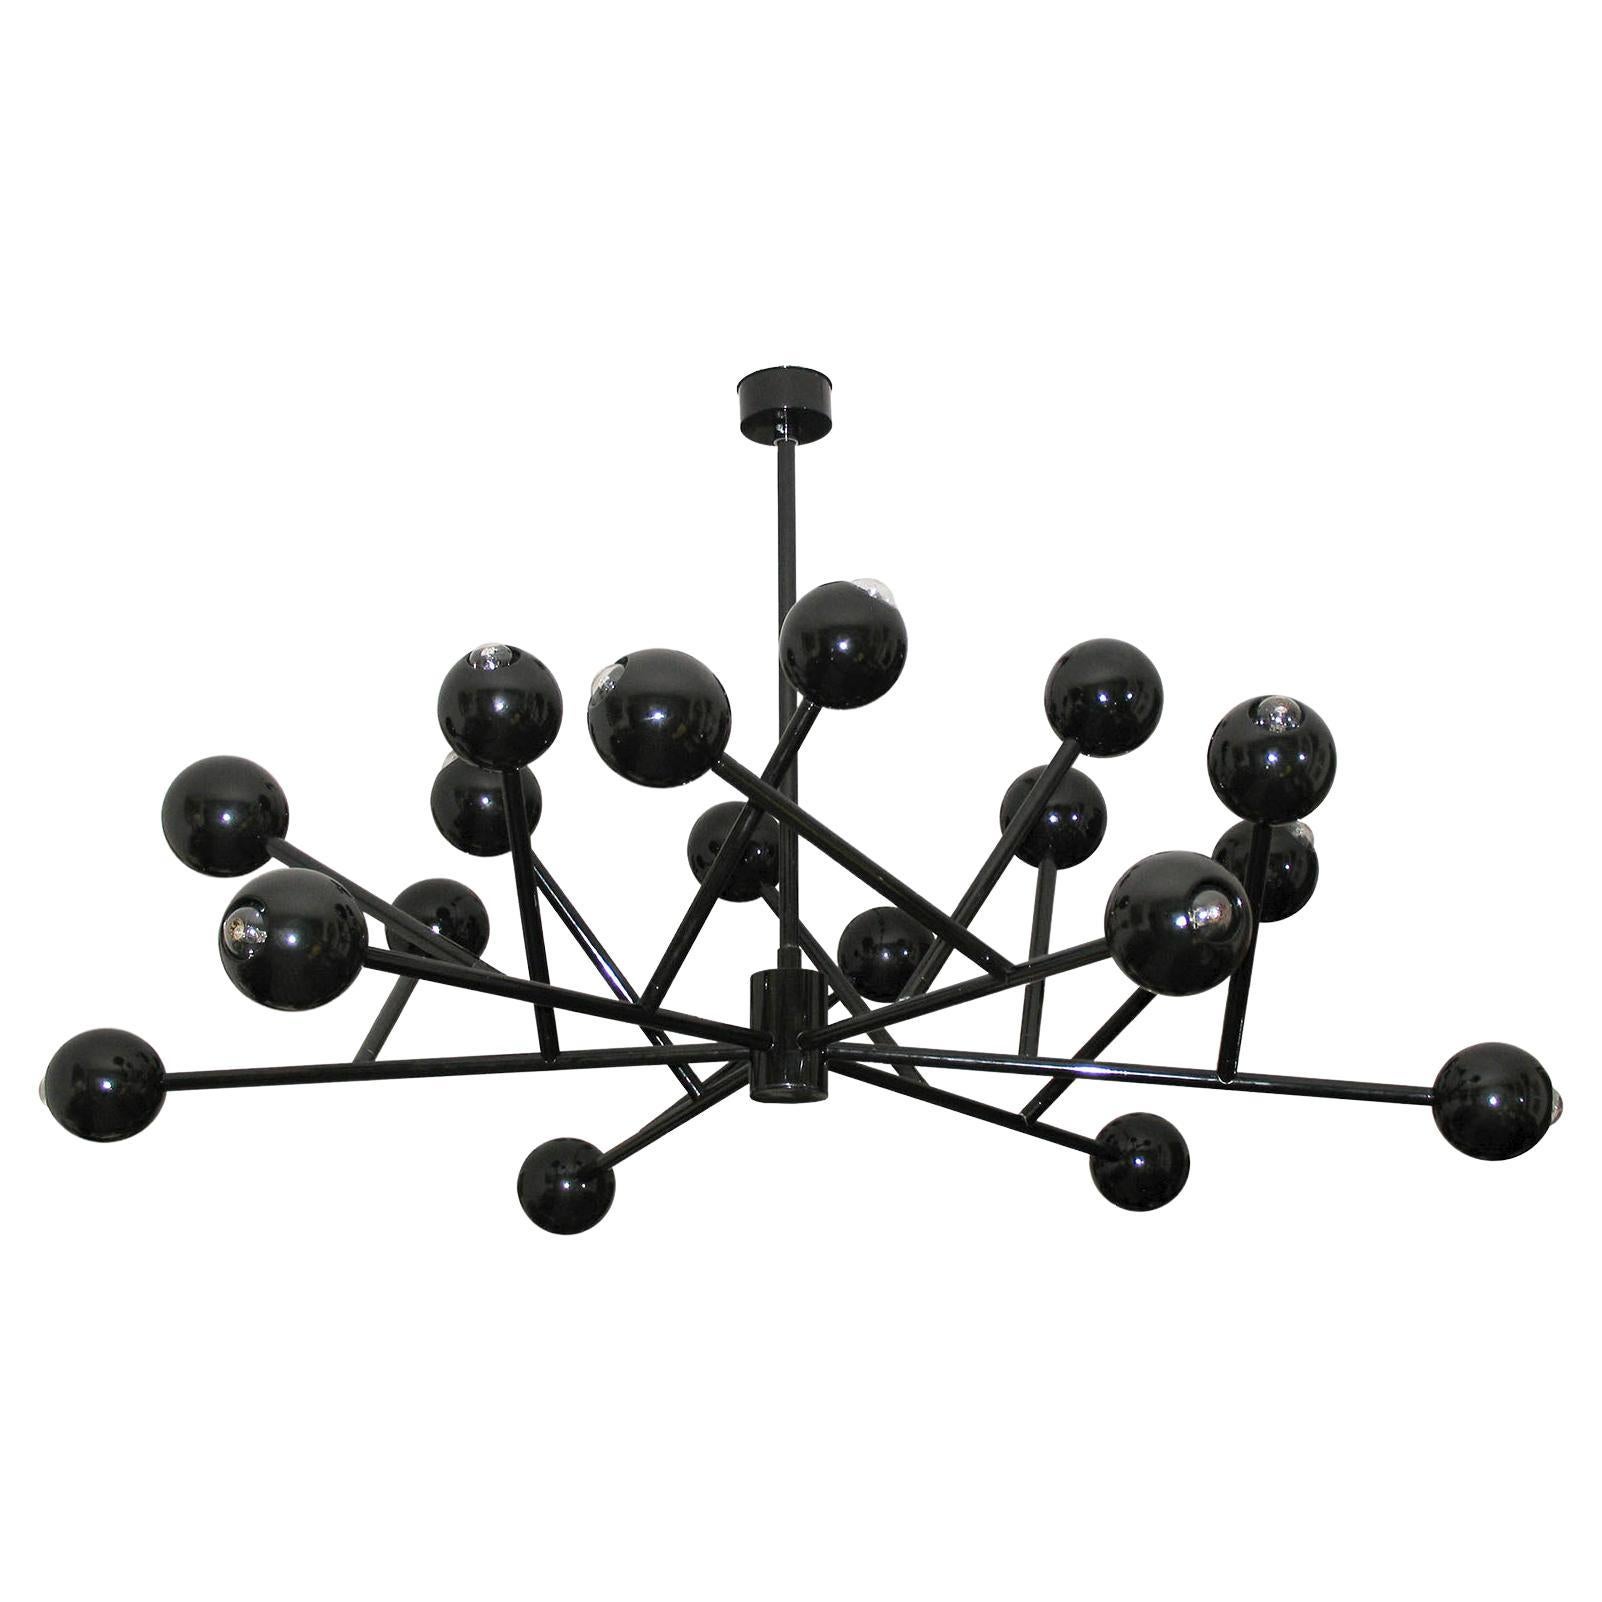 Black Burst Chandelier Extra Large 59 in. High Glossy Finish For Sale